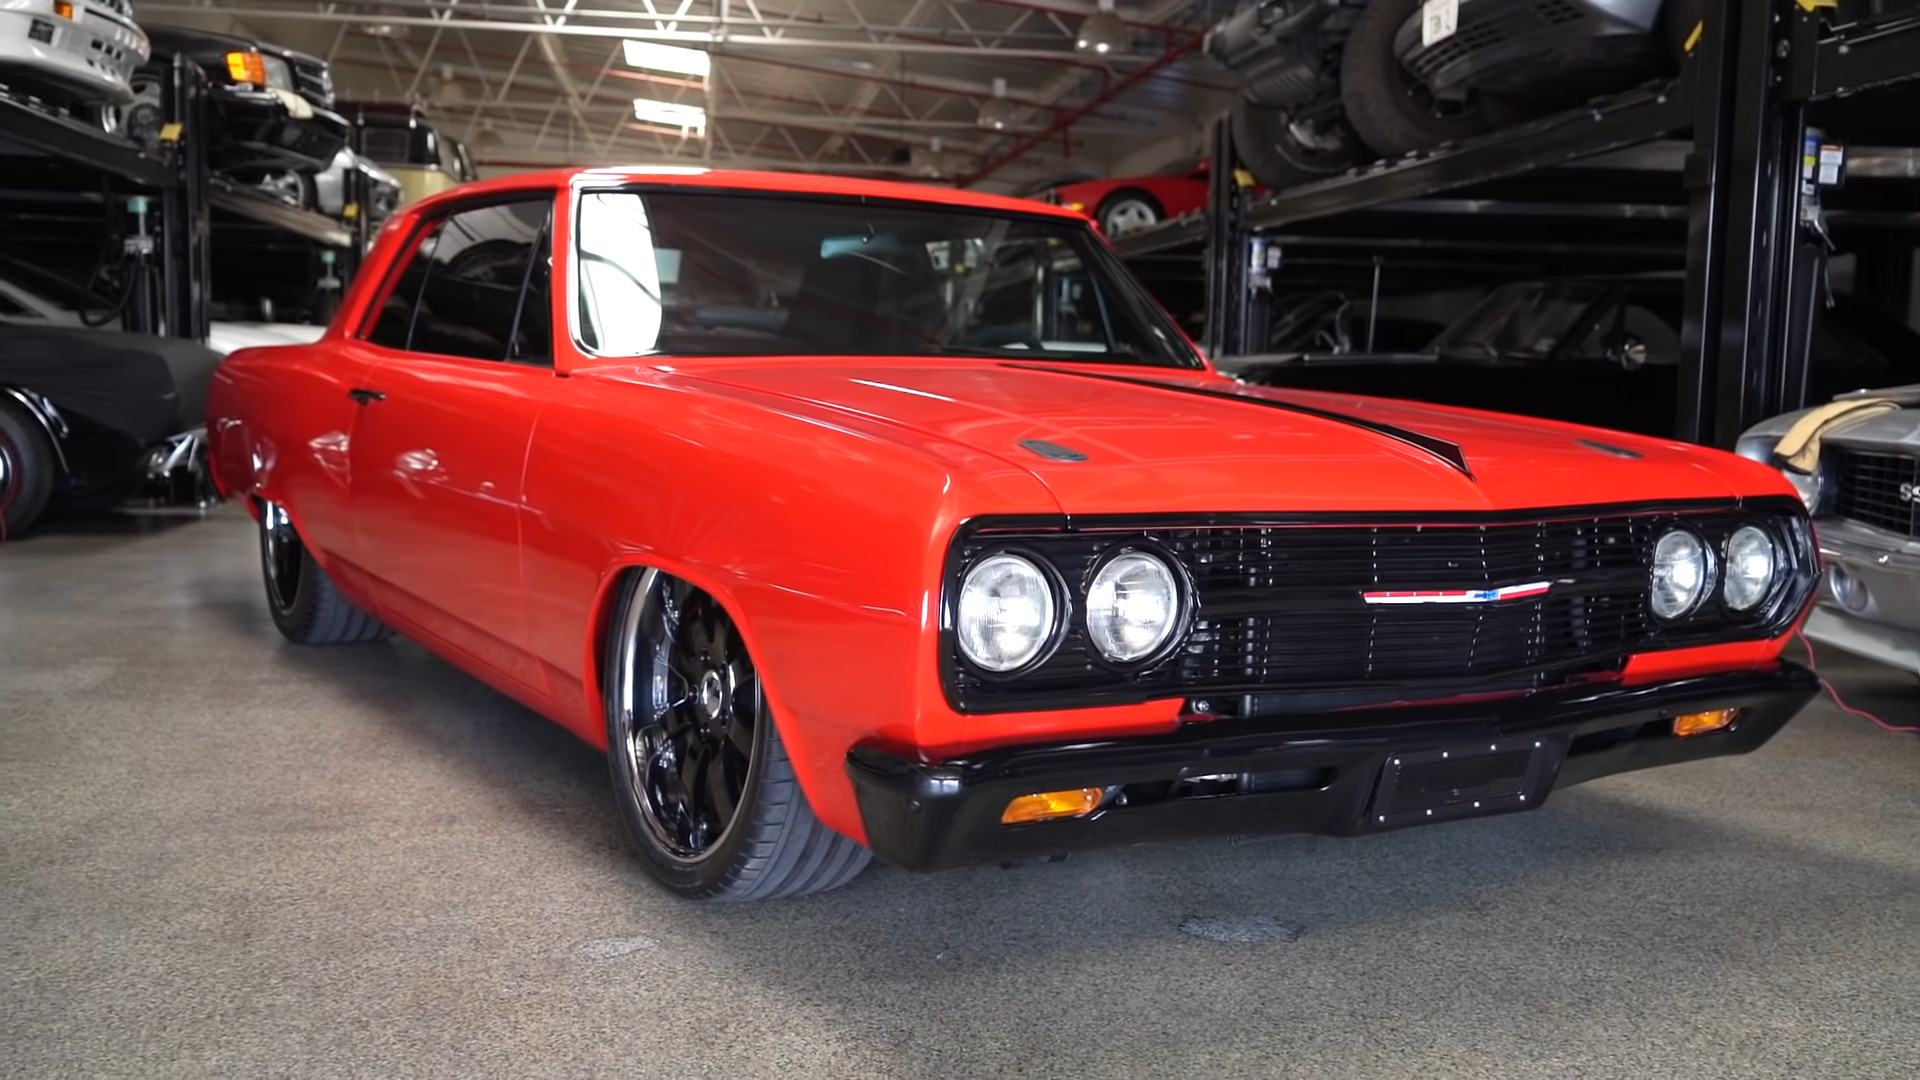 Victory Red 1965 Chevelle LS1 Restomod Makes 700 HP, Is Fully Custom